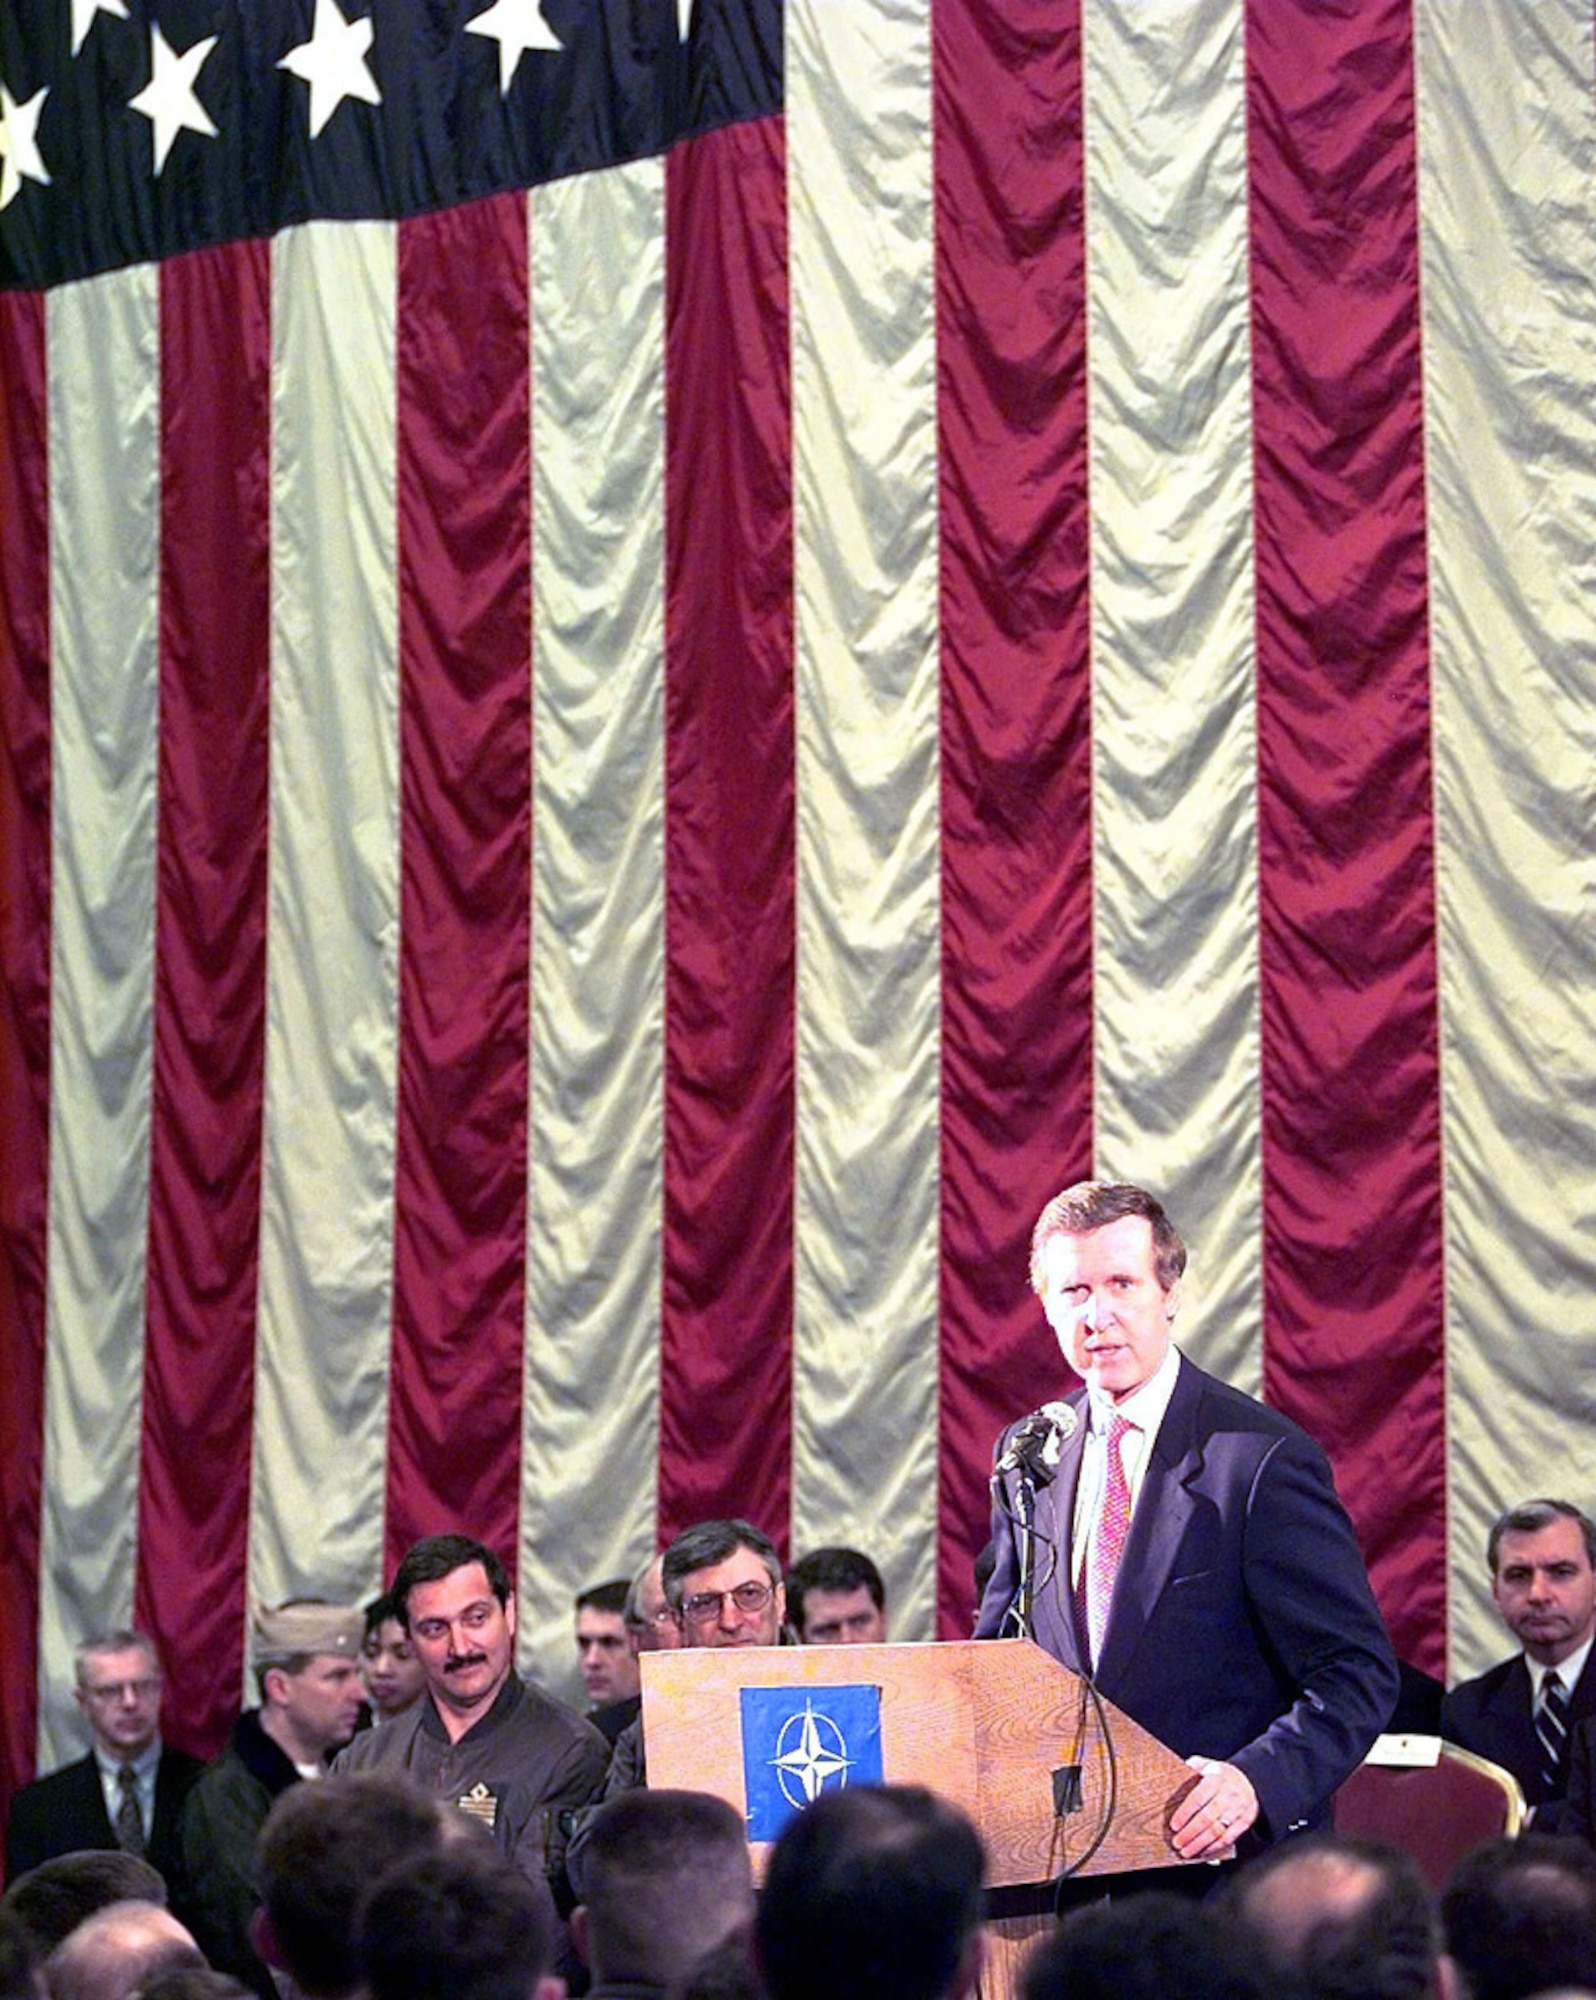 Former Defense Secretary William S. Cohen addresses personnel stationed and deployed to Aviano Air Base, Italy, supporting NATO Operation Allied Force, April 8, 1999. In a report to Congress on the operations in the following January, Cohen recognized the efforts of the Air Force Medical Service. (U.S. Air Force photo by Senior Airman Stan Parker)